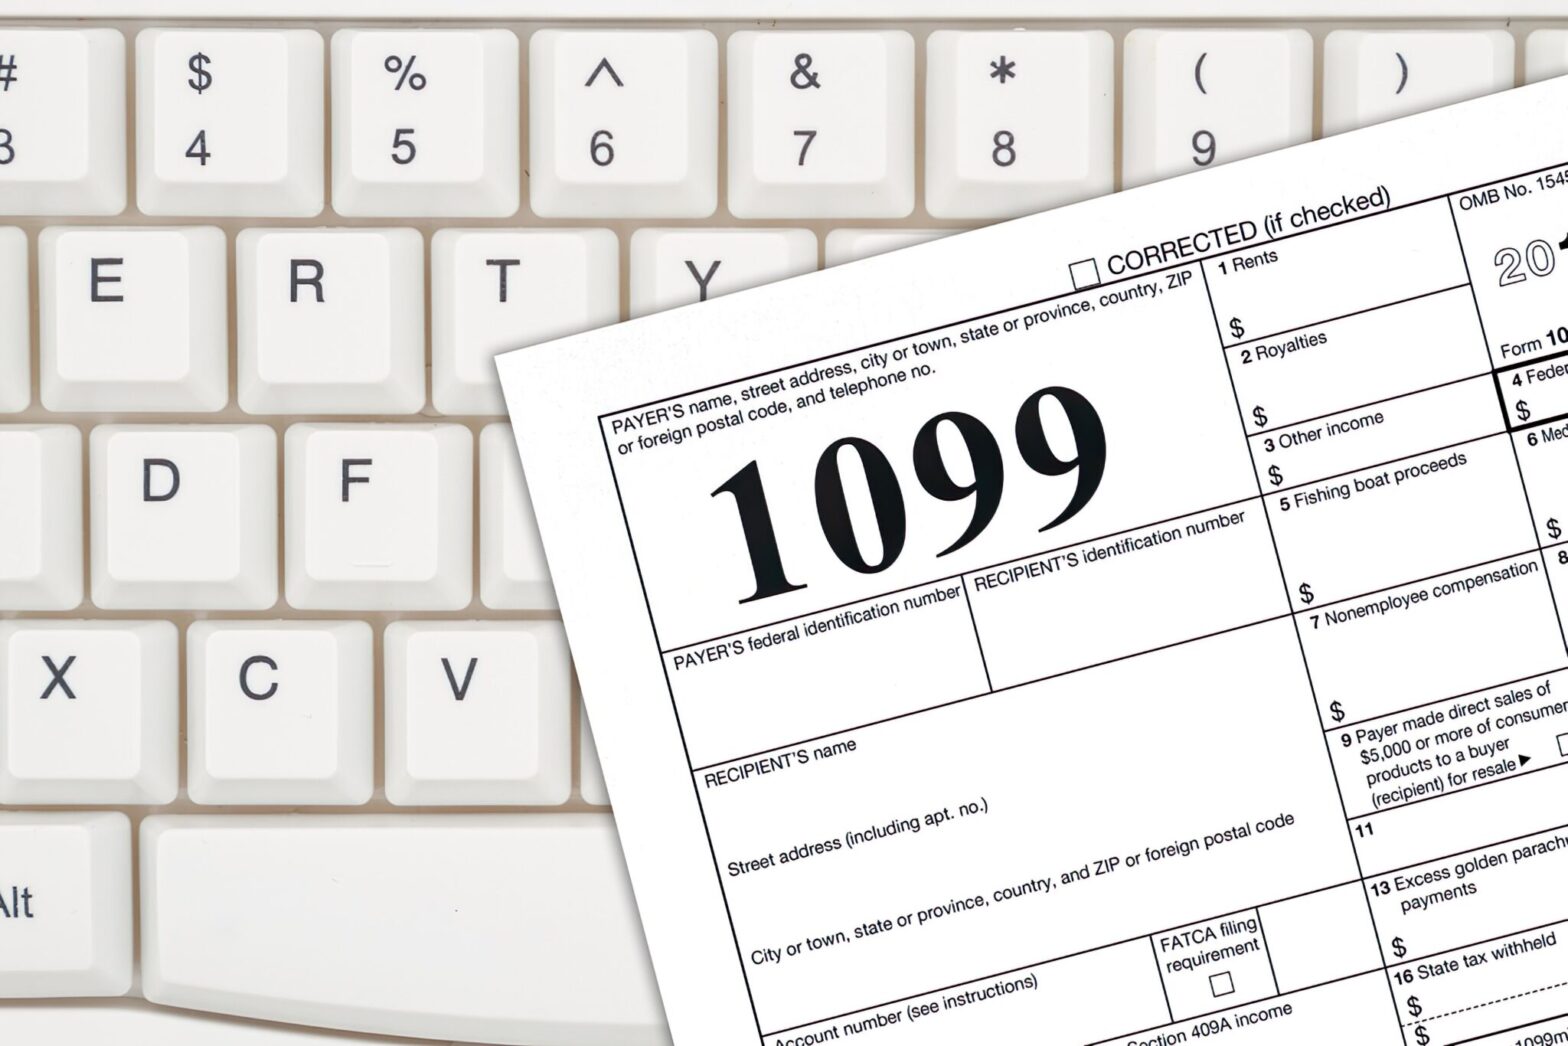 Form 1099-NEC or 1099-MISC?